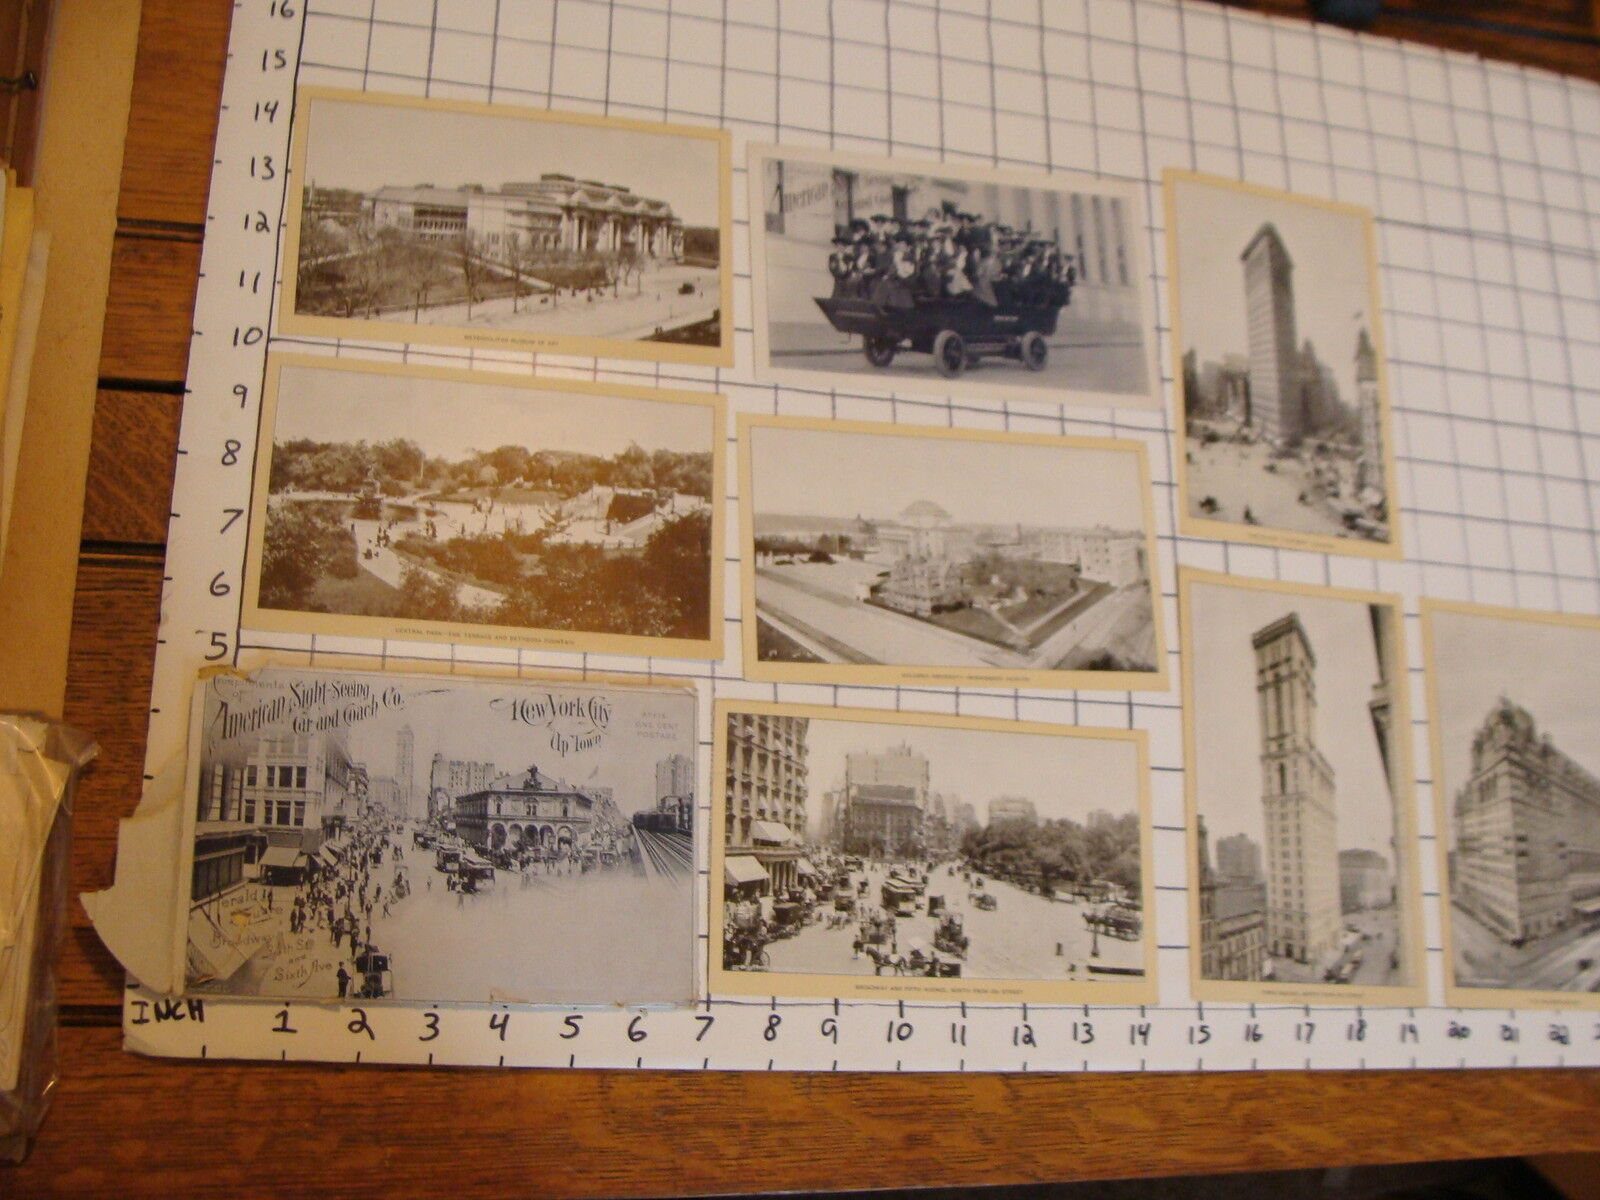 1904 American Sight-Seeing Car & Coach co. NEW YORK CITY photo cards UPTOWN